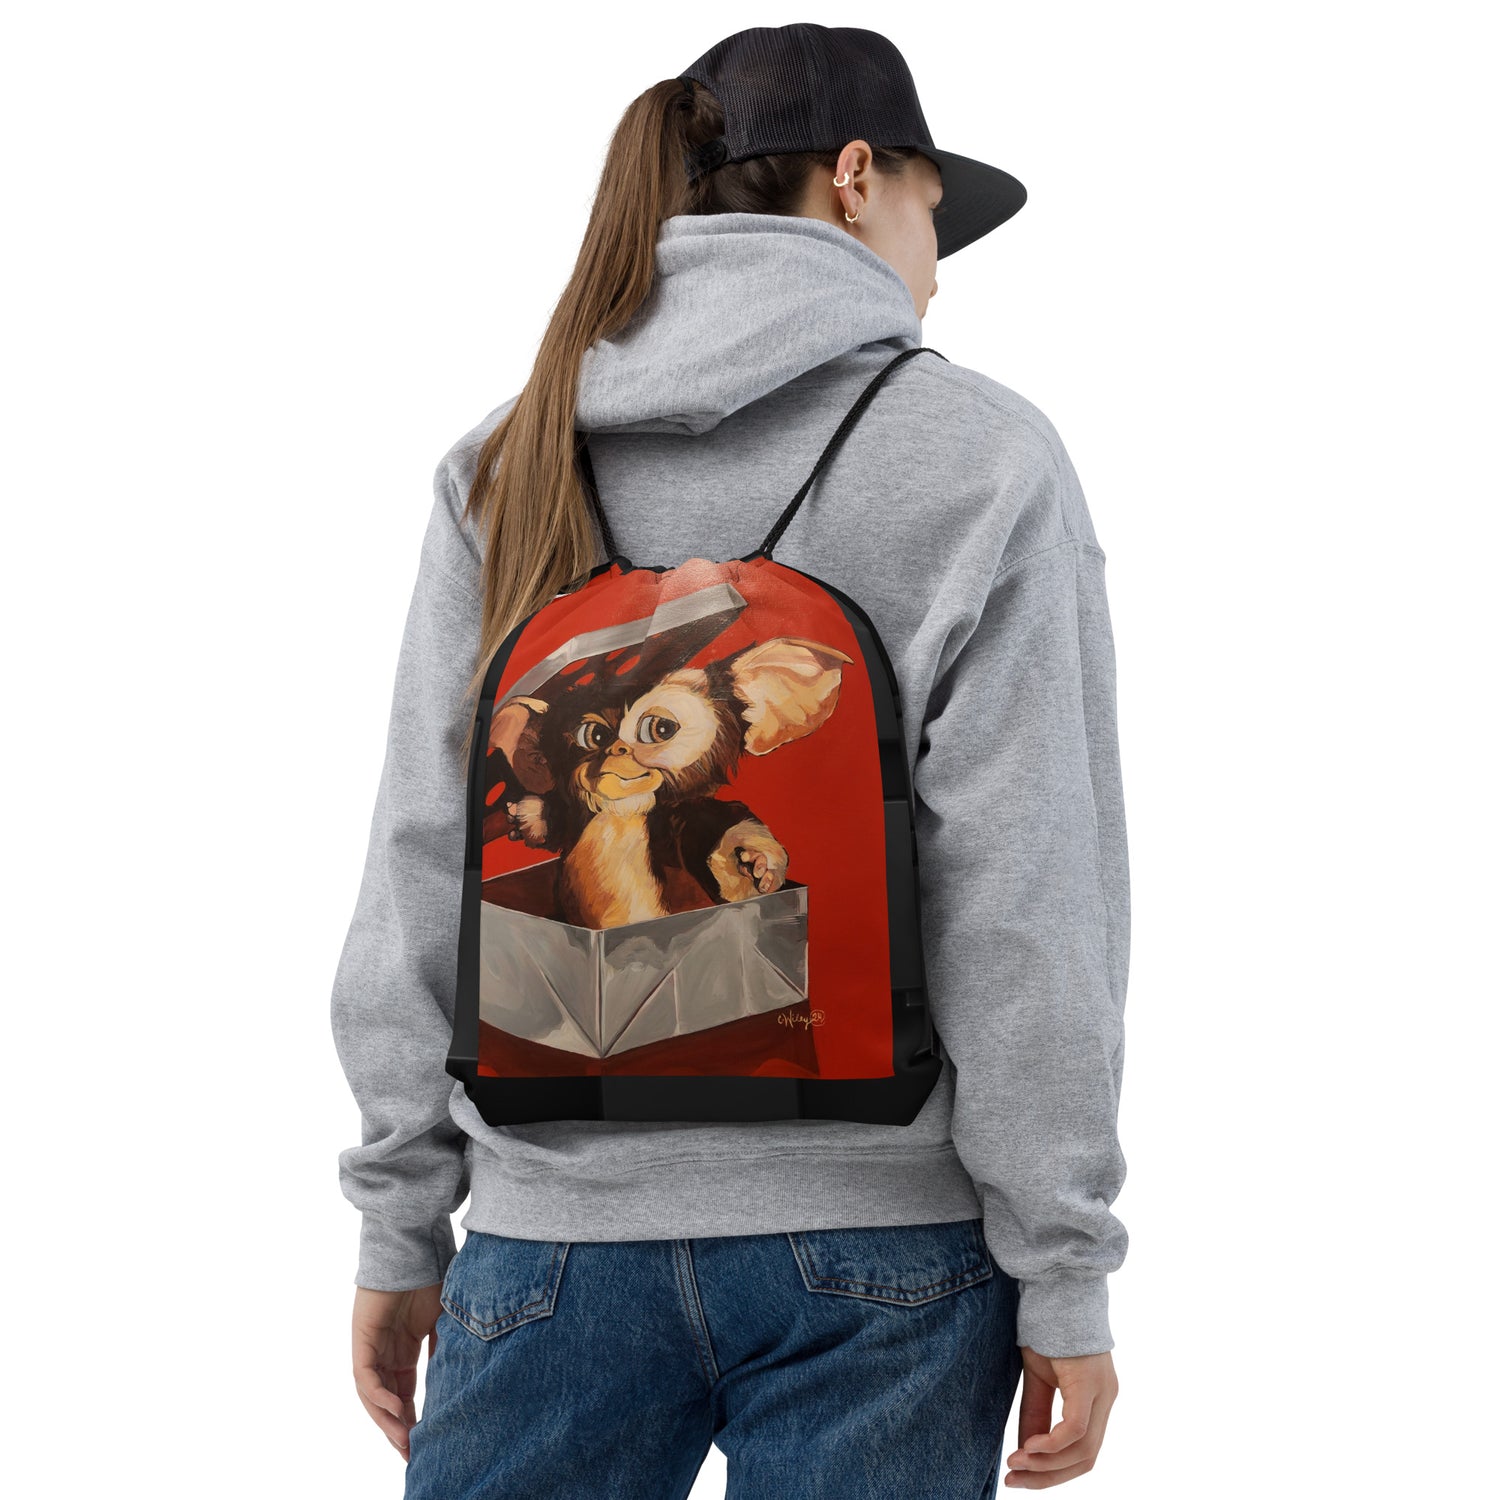 A woman in a cap and sweatshirt wearing a drawstring bag that features Gizmo the Gremlin on her back.